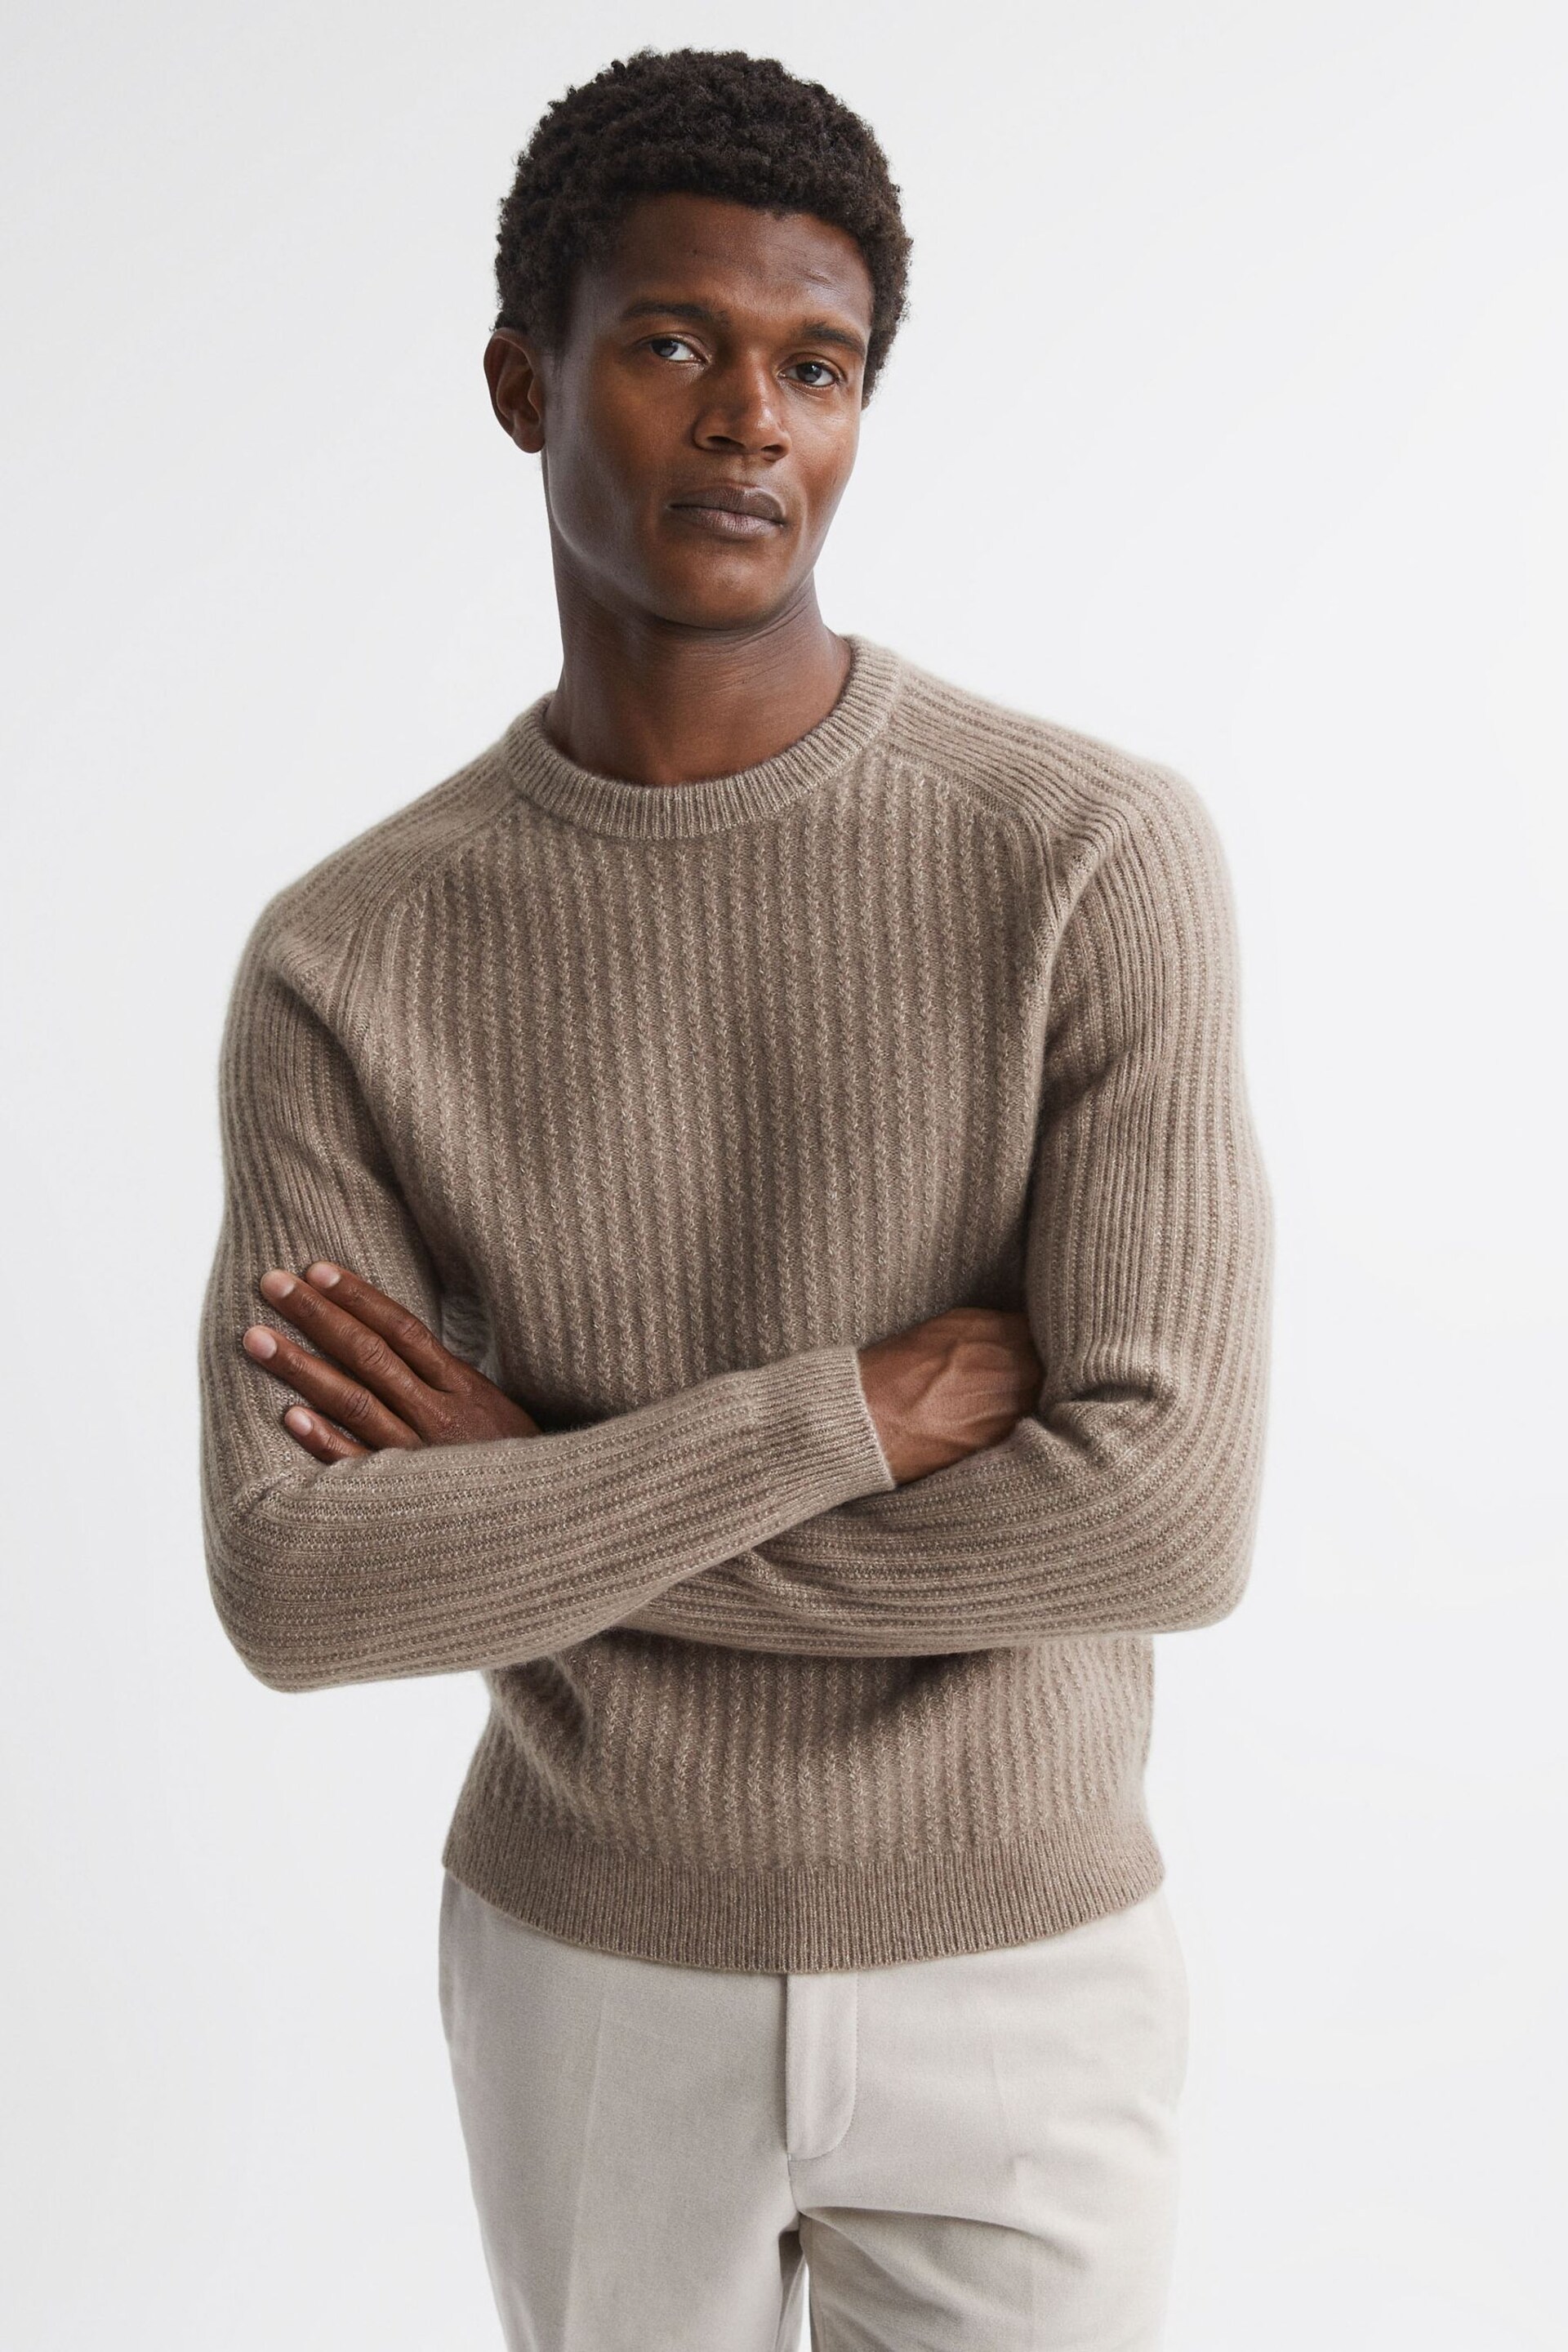 Reiss Mouse Melange Millerson Wool-Cotton Textured Crew Neck Jumper - Image 1 of 5